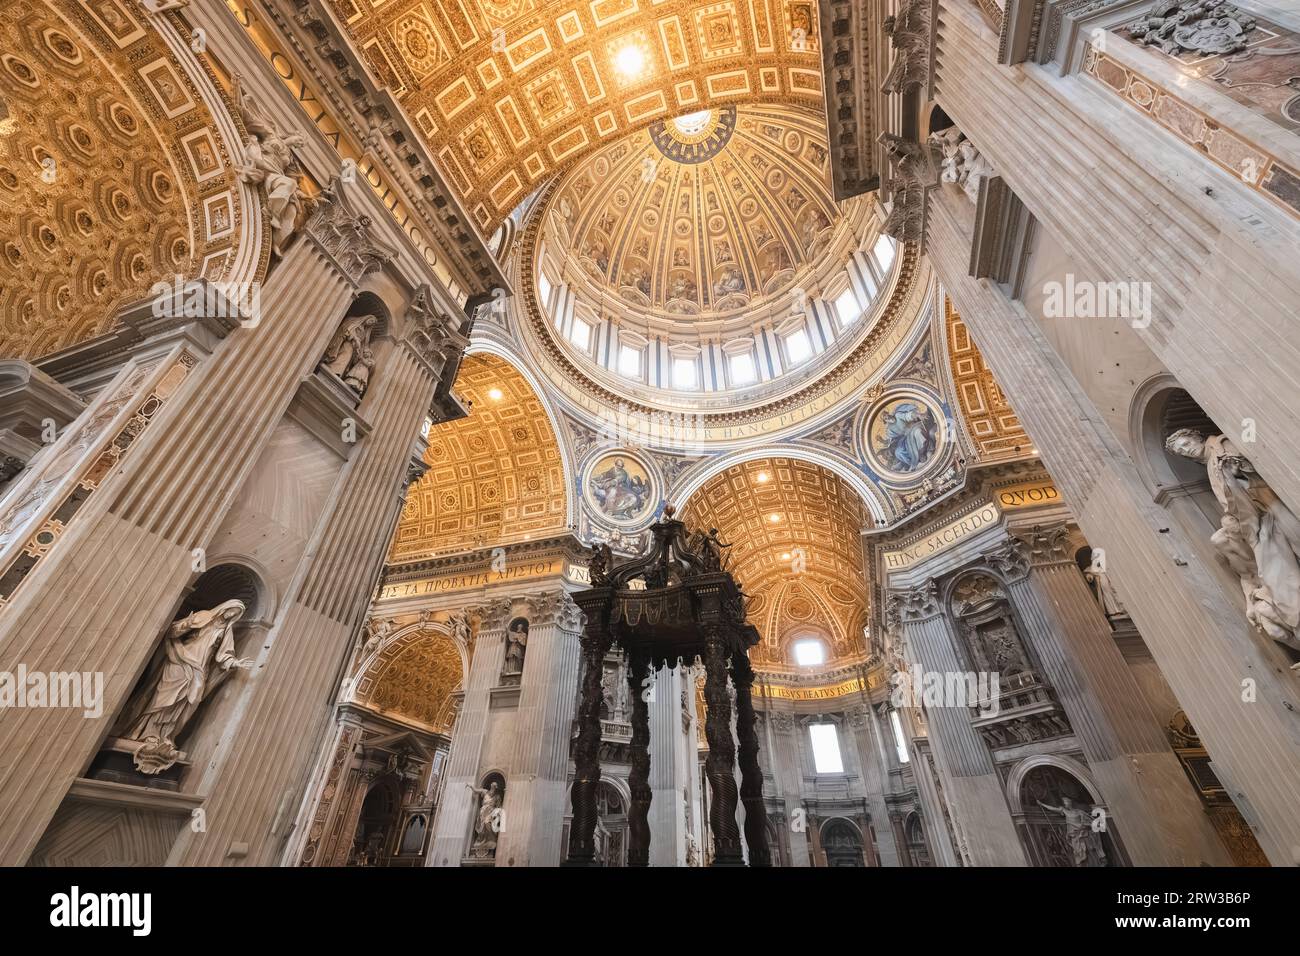 Extravagant interior and vaulted ceiling dome above Bernini's Baldacchino altarpiece inside Saint Peter's Basilica, home of the Roman Catholic Church Stock Photo